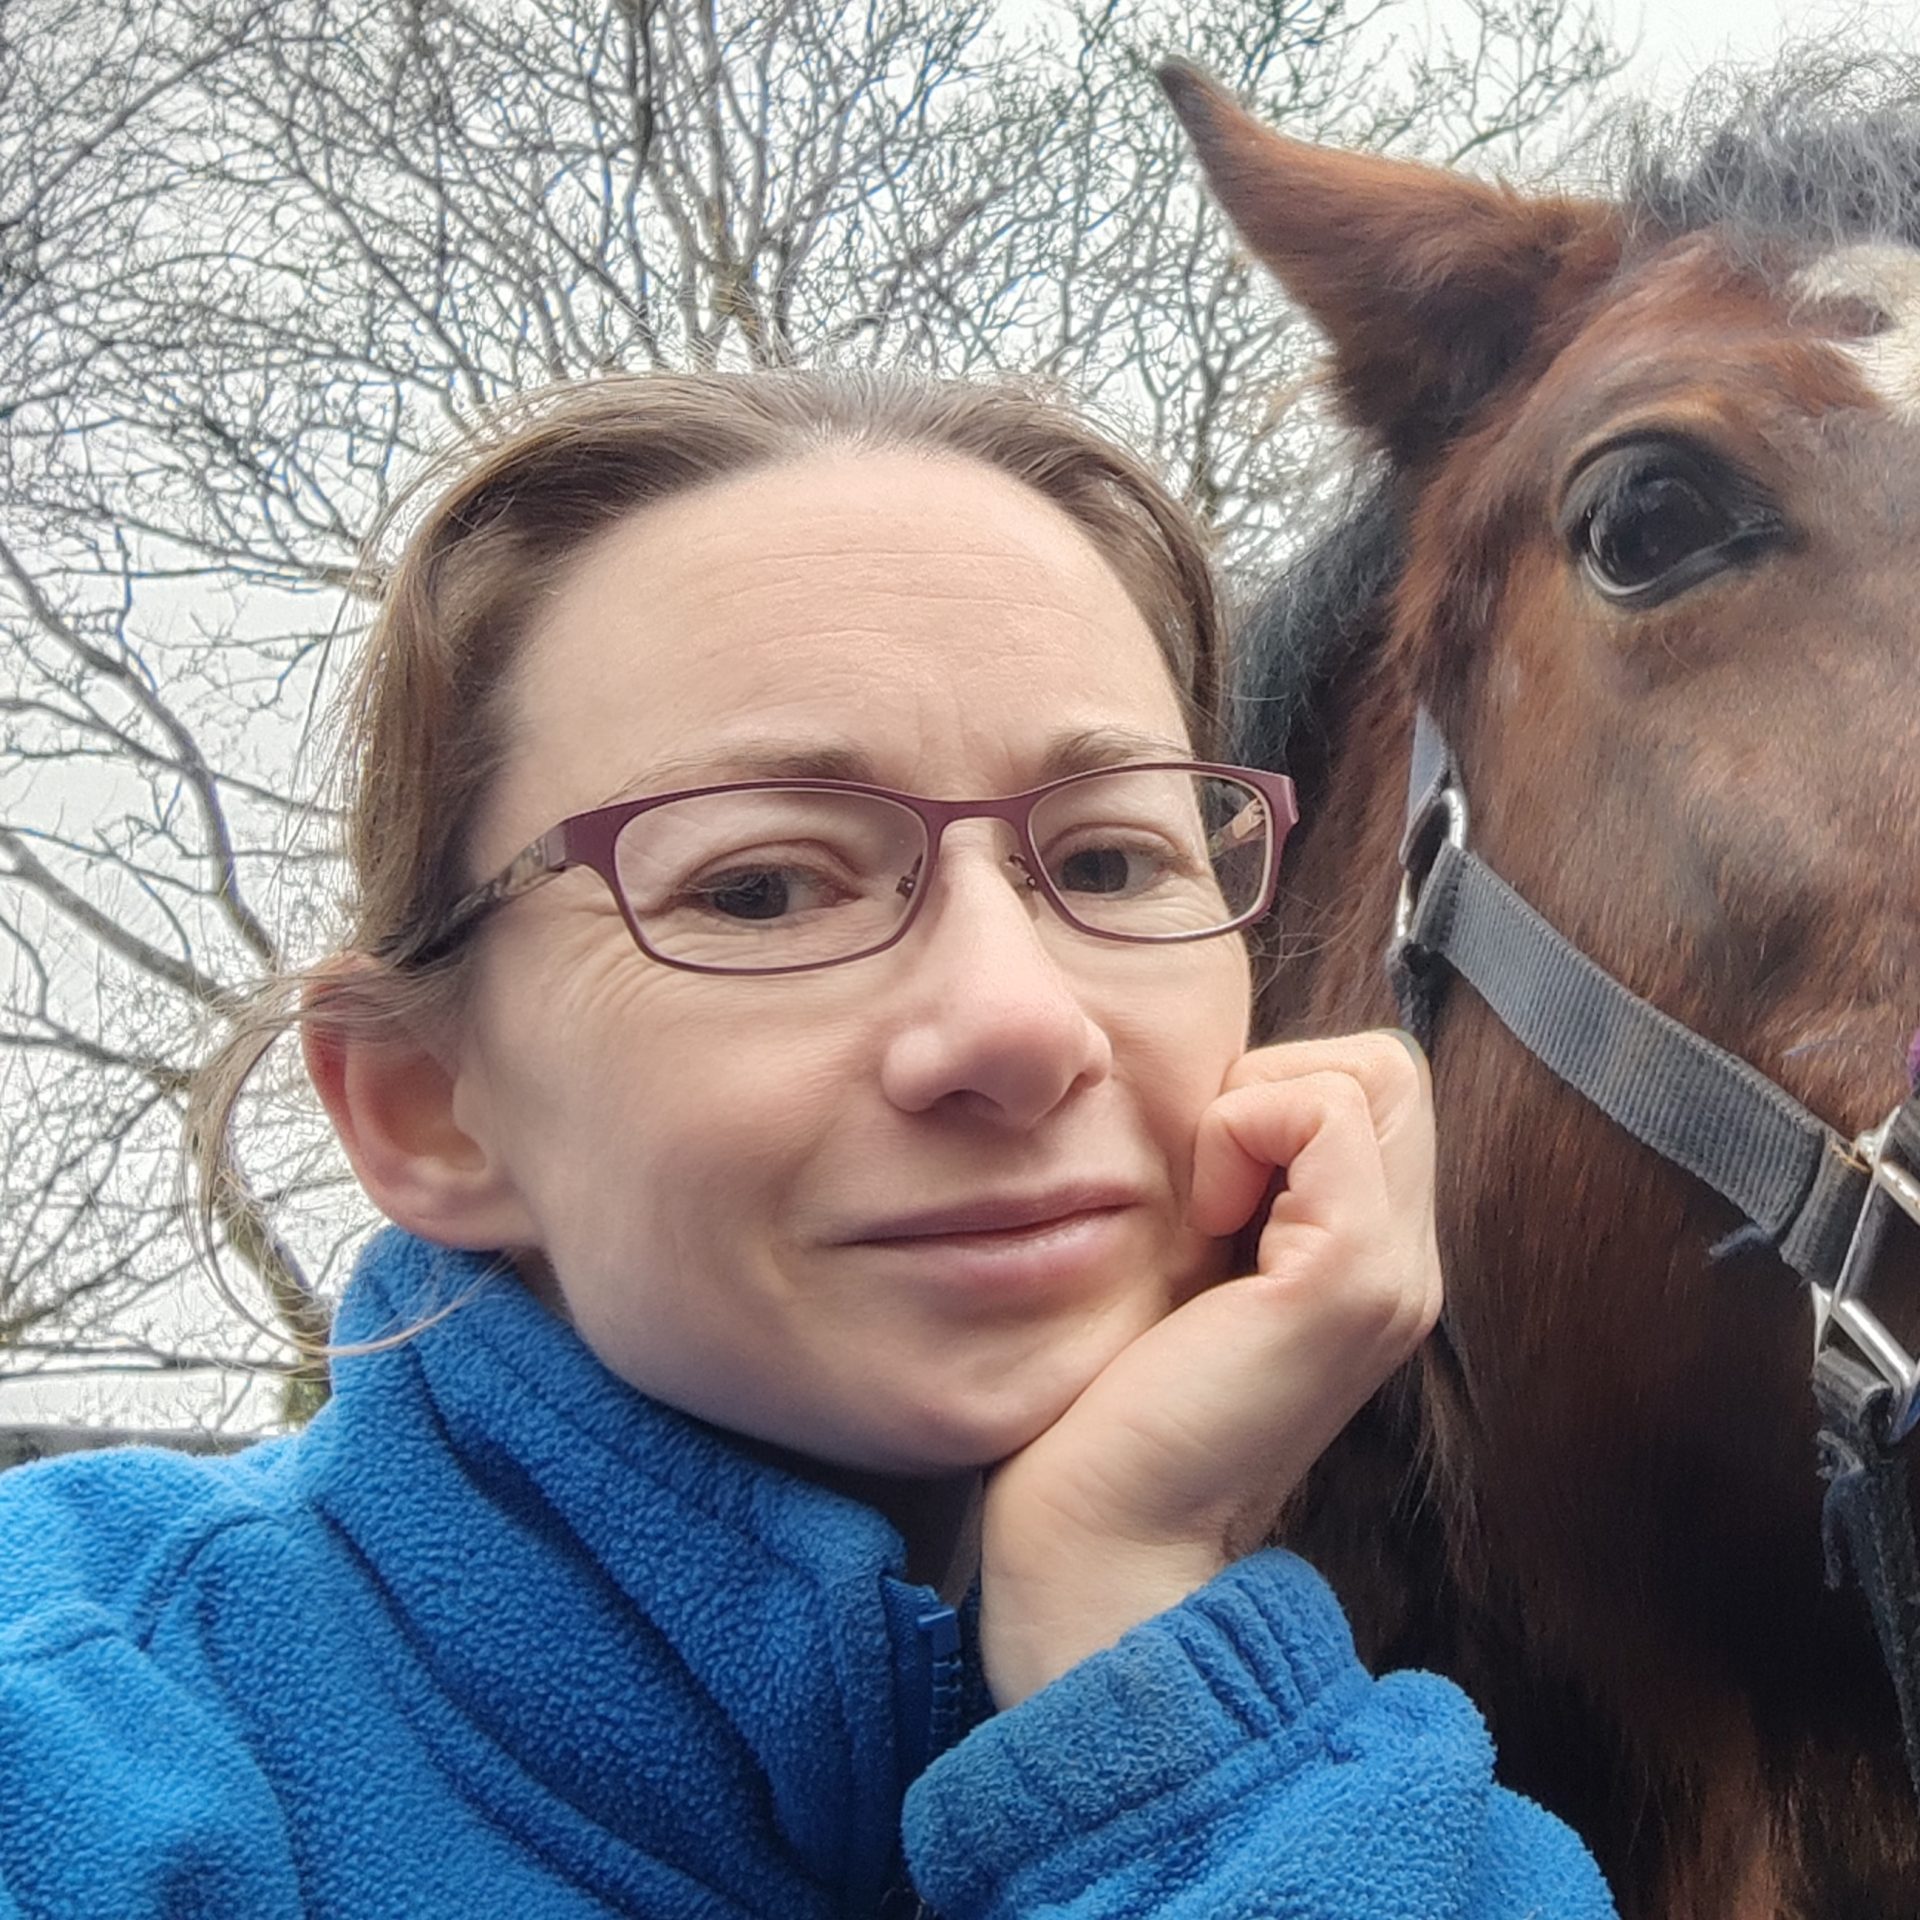 The photo shows our staff member Jenny stood with a horse, she is smiling at the camera